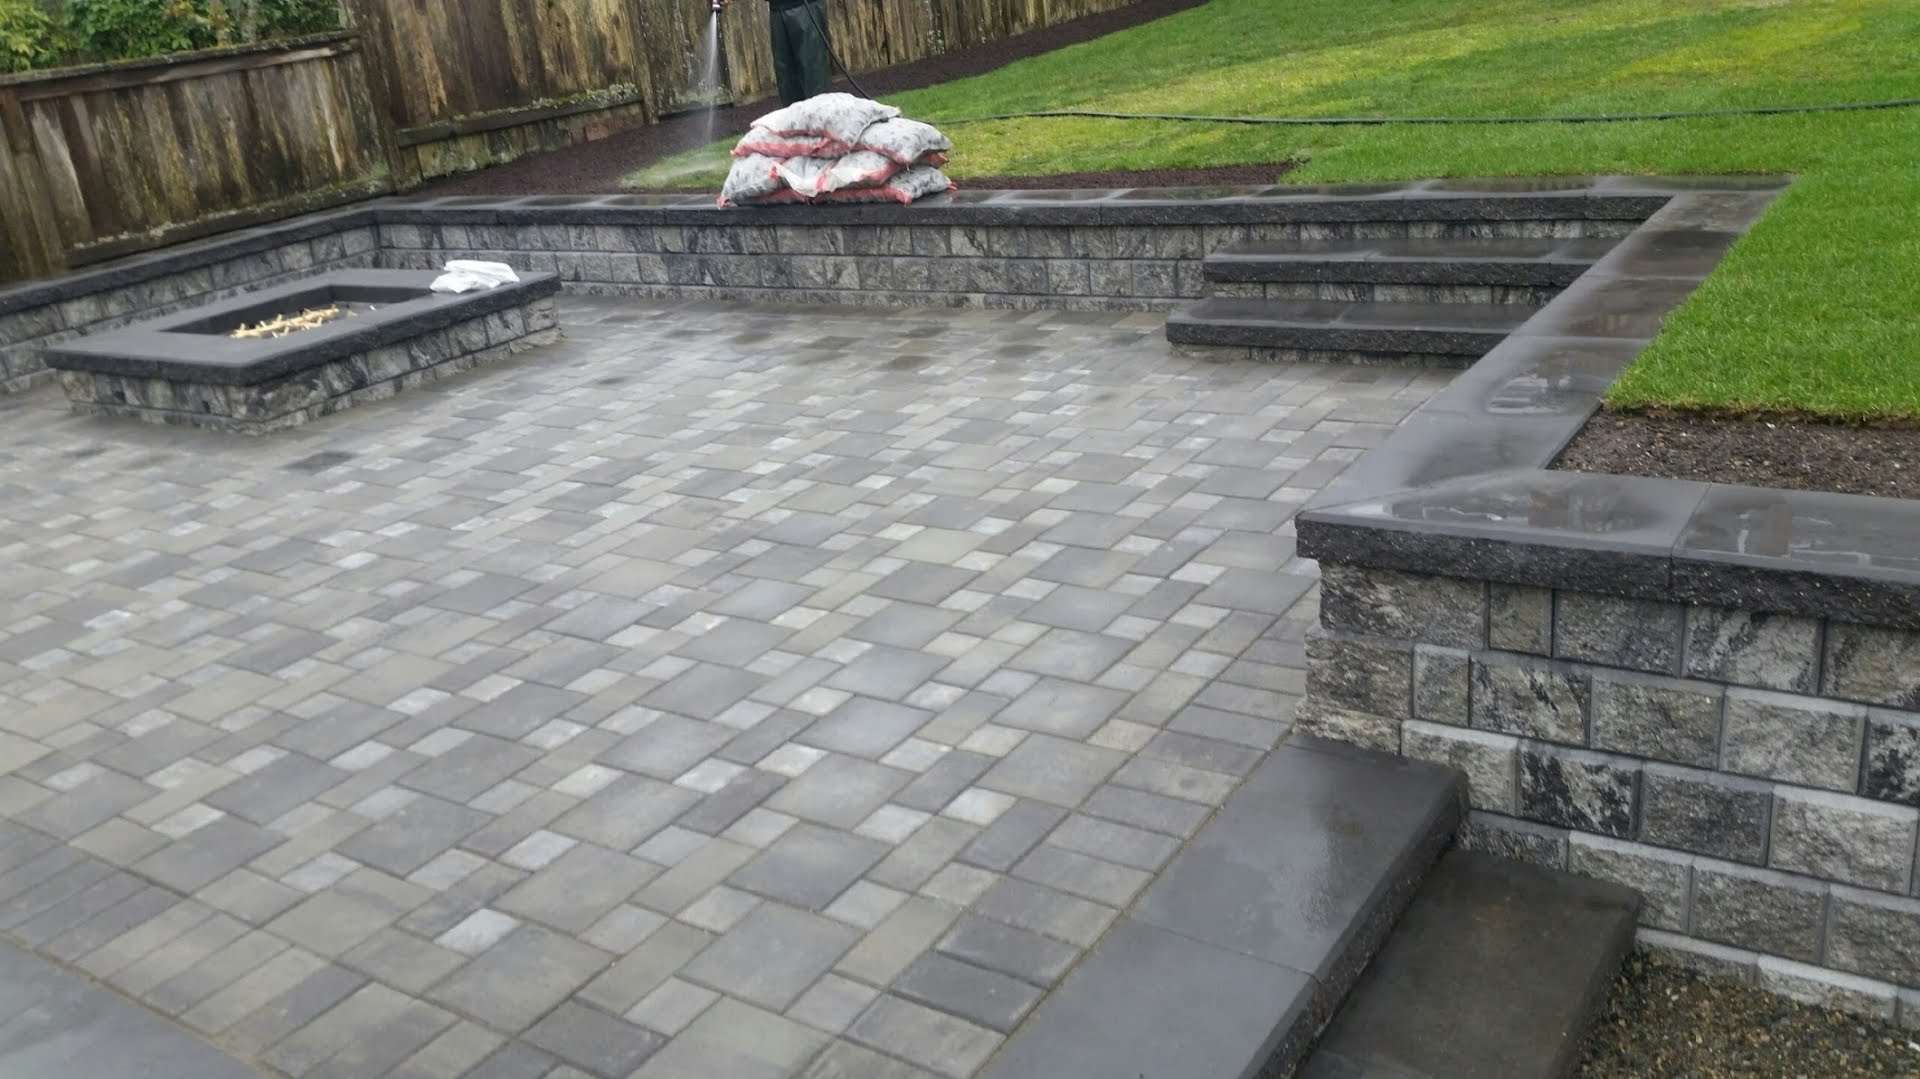 PATIO WITH STANDARD SHADOW PAVERS. AND RETAINING WALLS WITH PISALITE BLOCKS